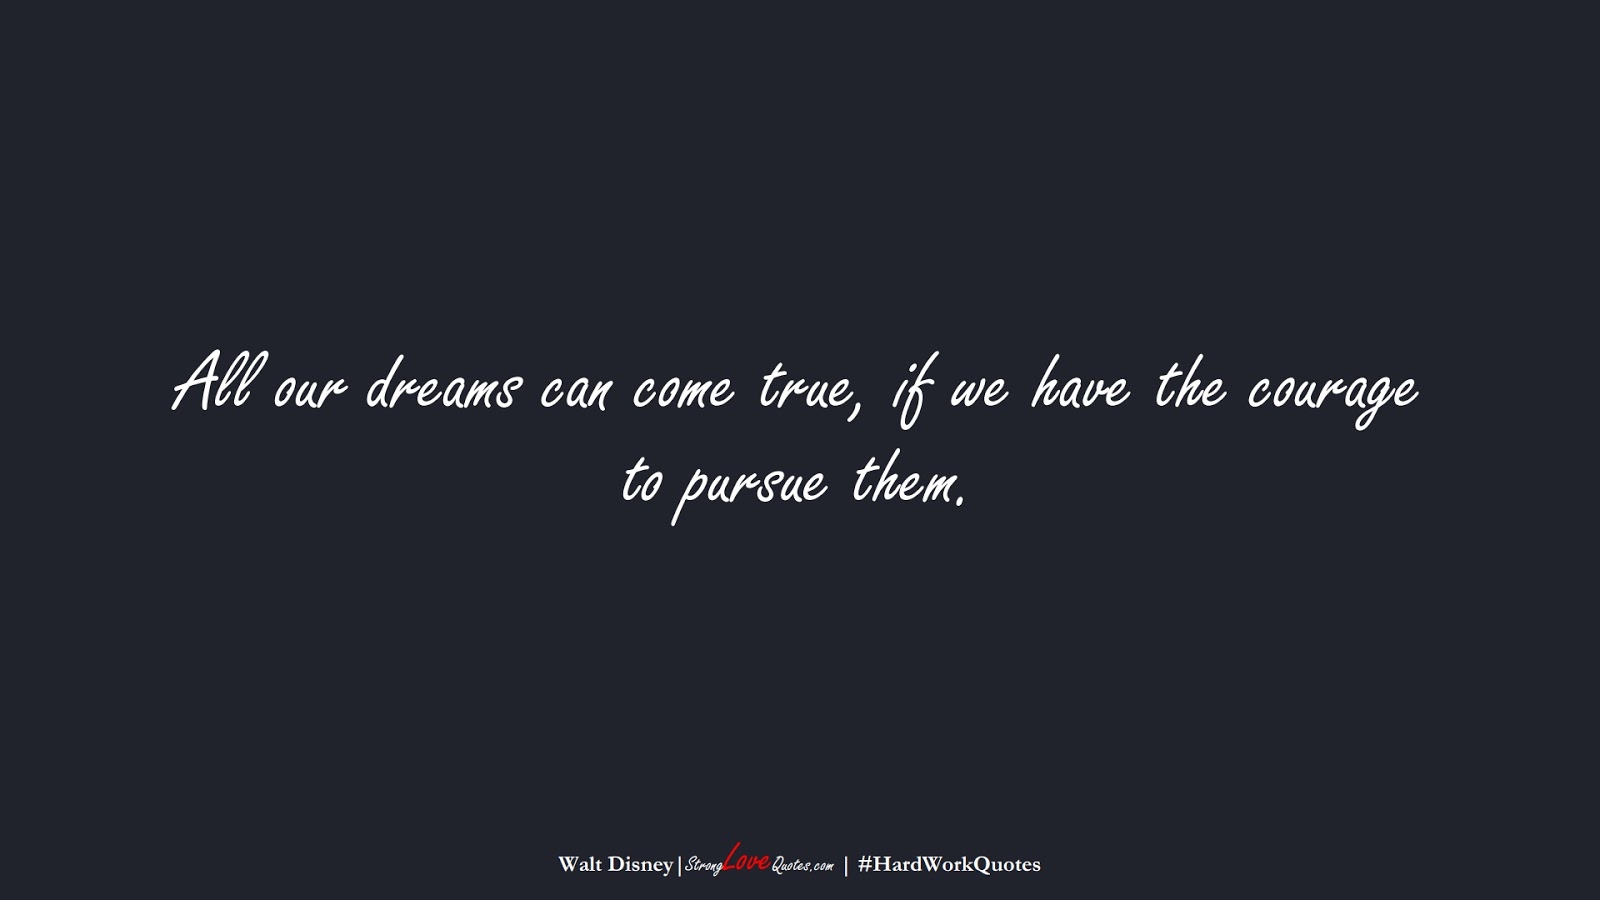 All our dreams can come true, if we have the courage to pursue them. (Walt Disney);  #HardWorkQuotes